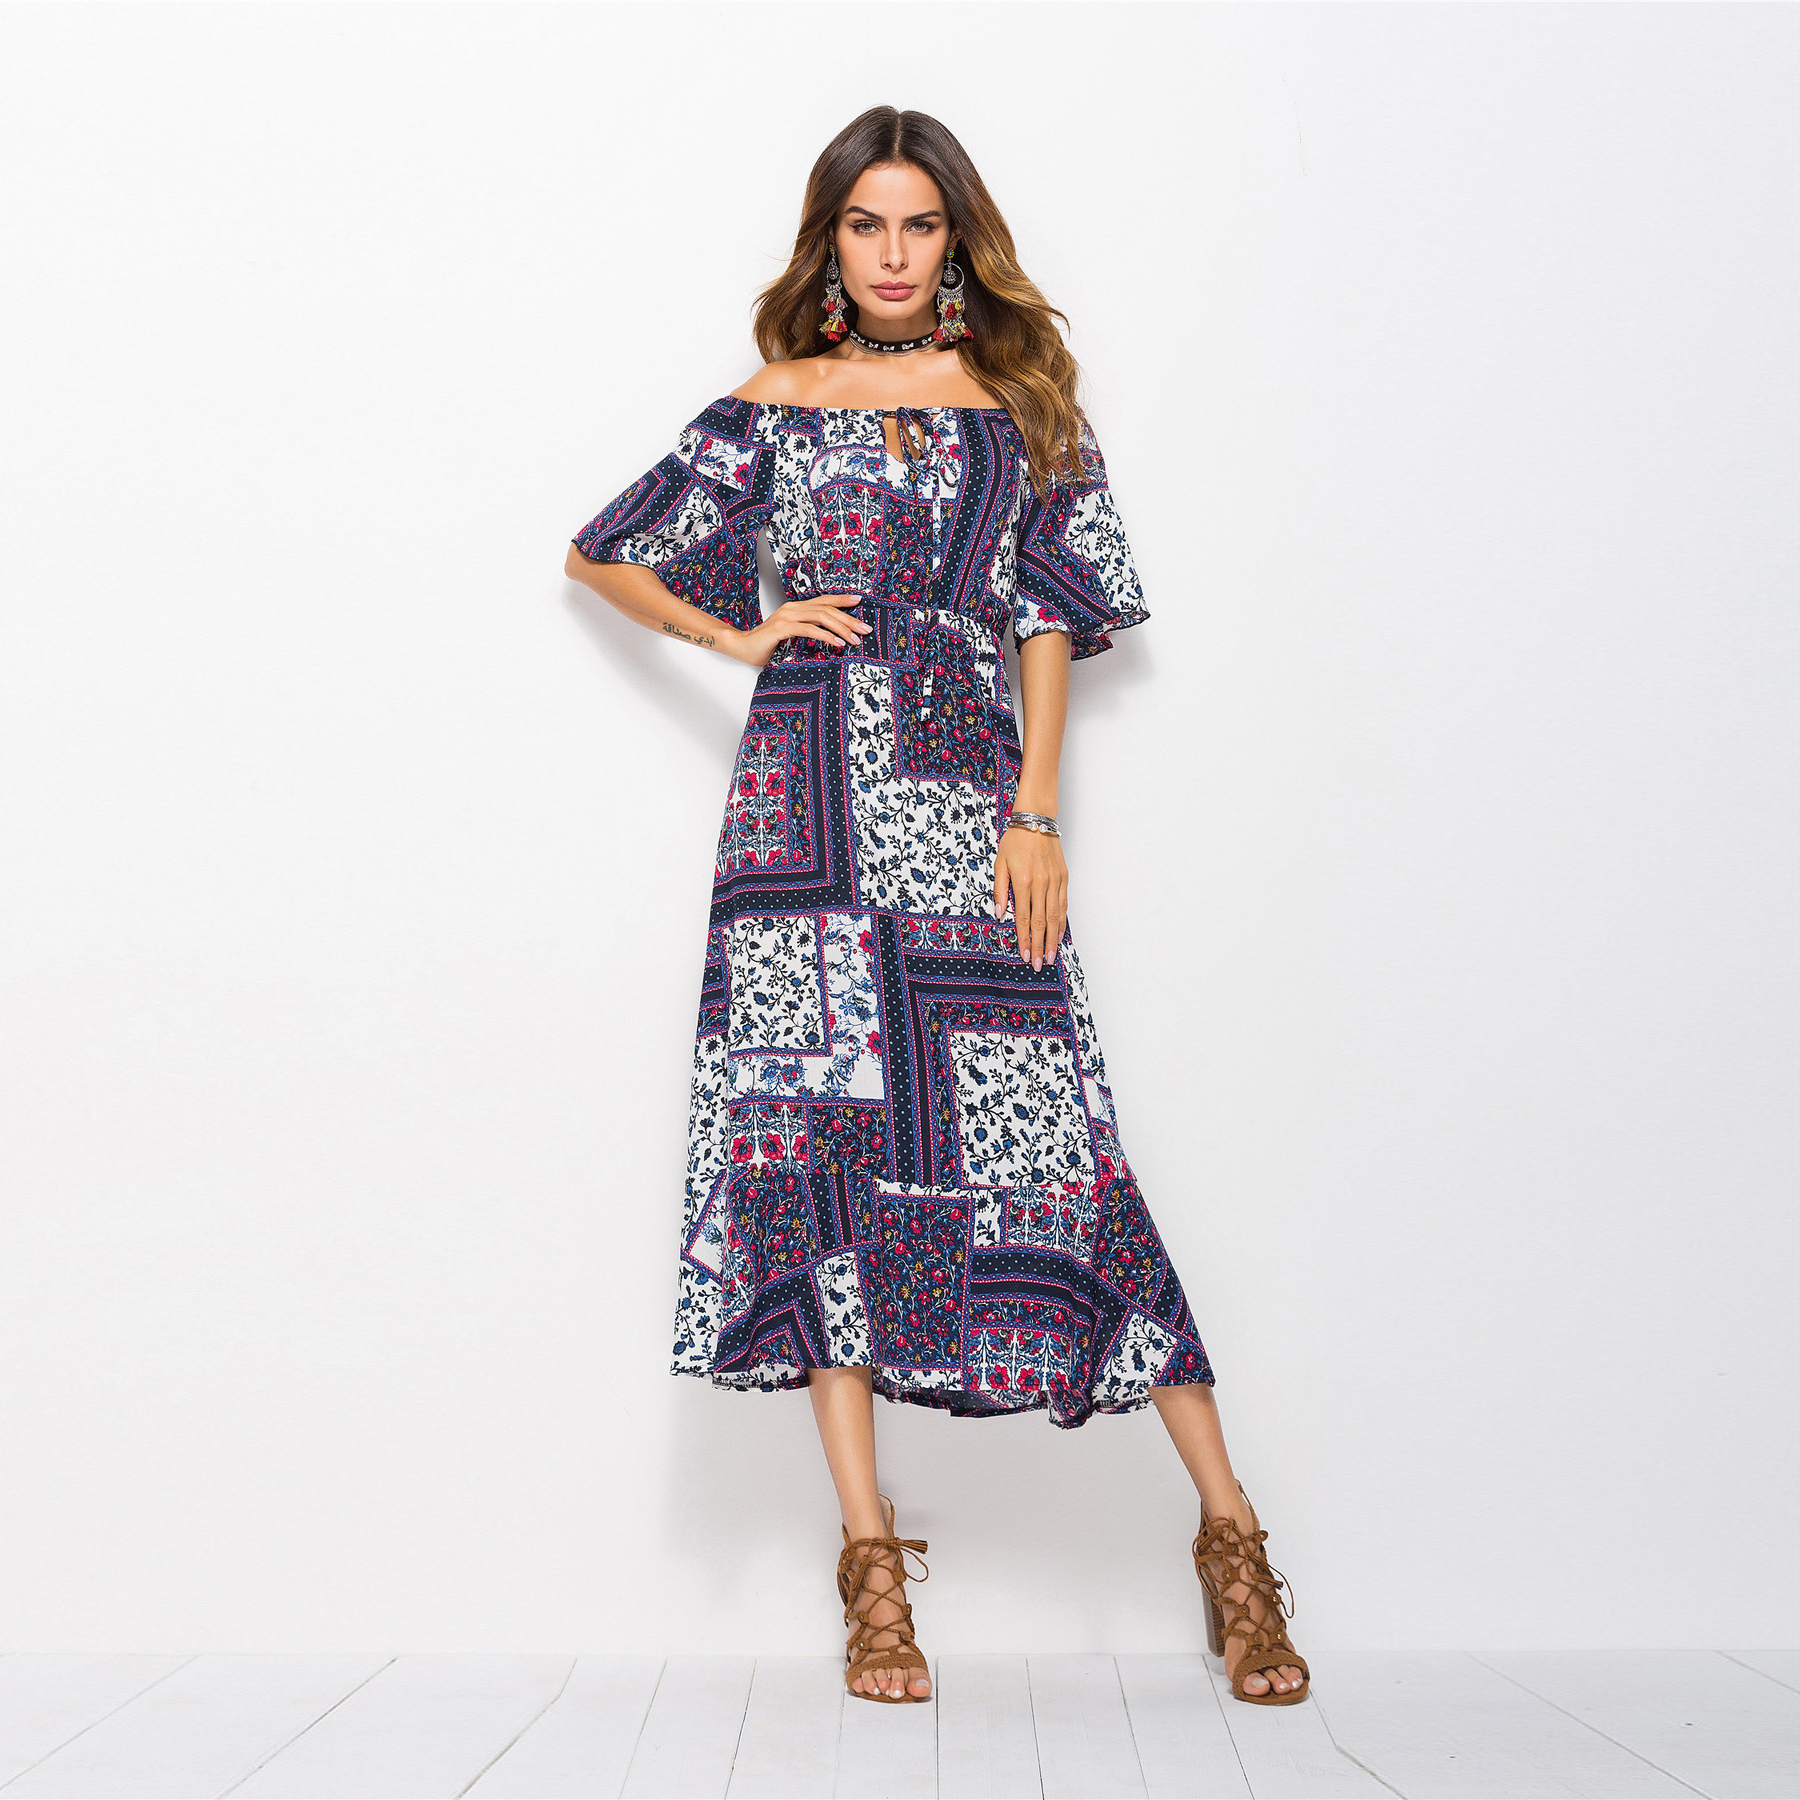 Bohemian Clothes For Women Discount, 50% OFF | www.rupit.com